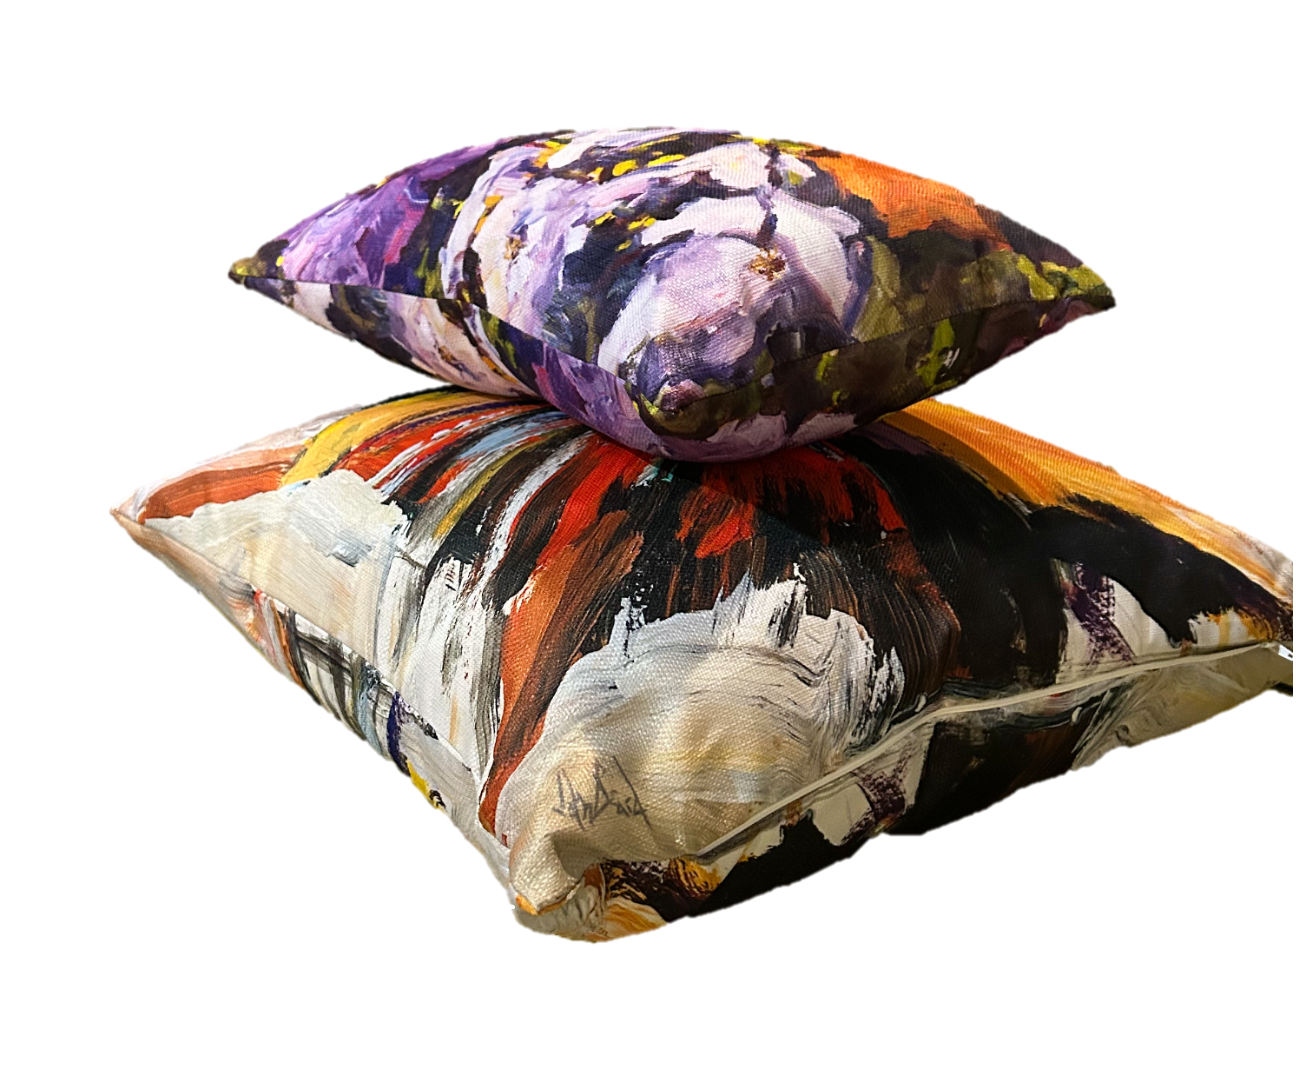 Wild Tranquility Pillow